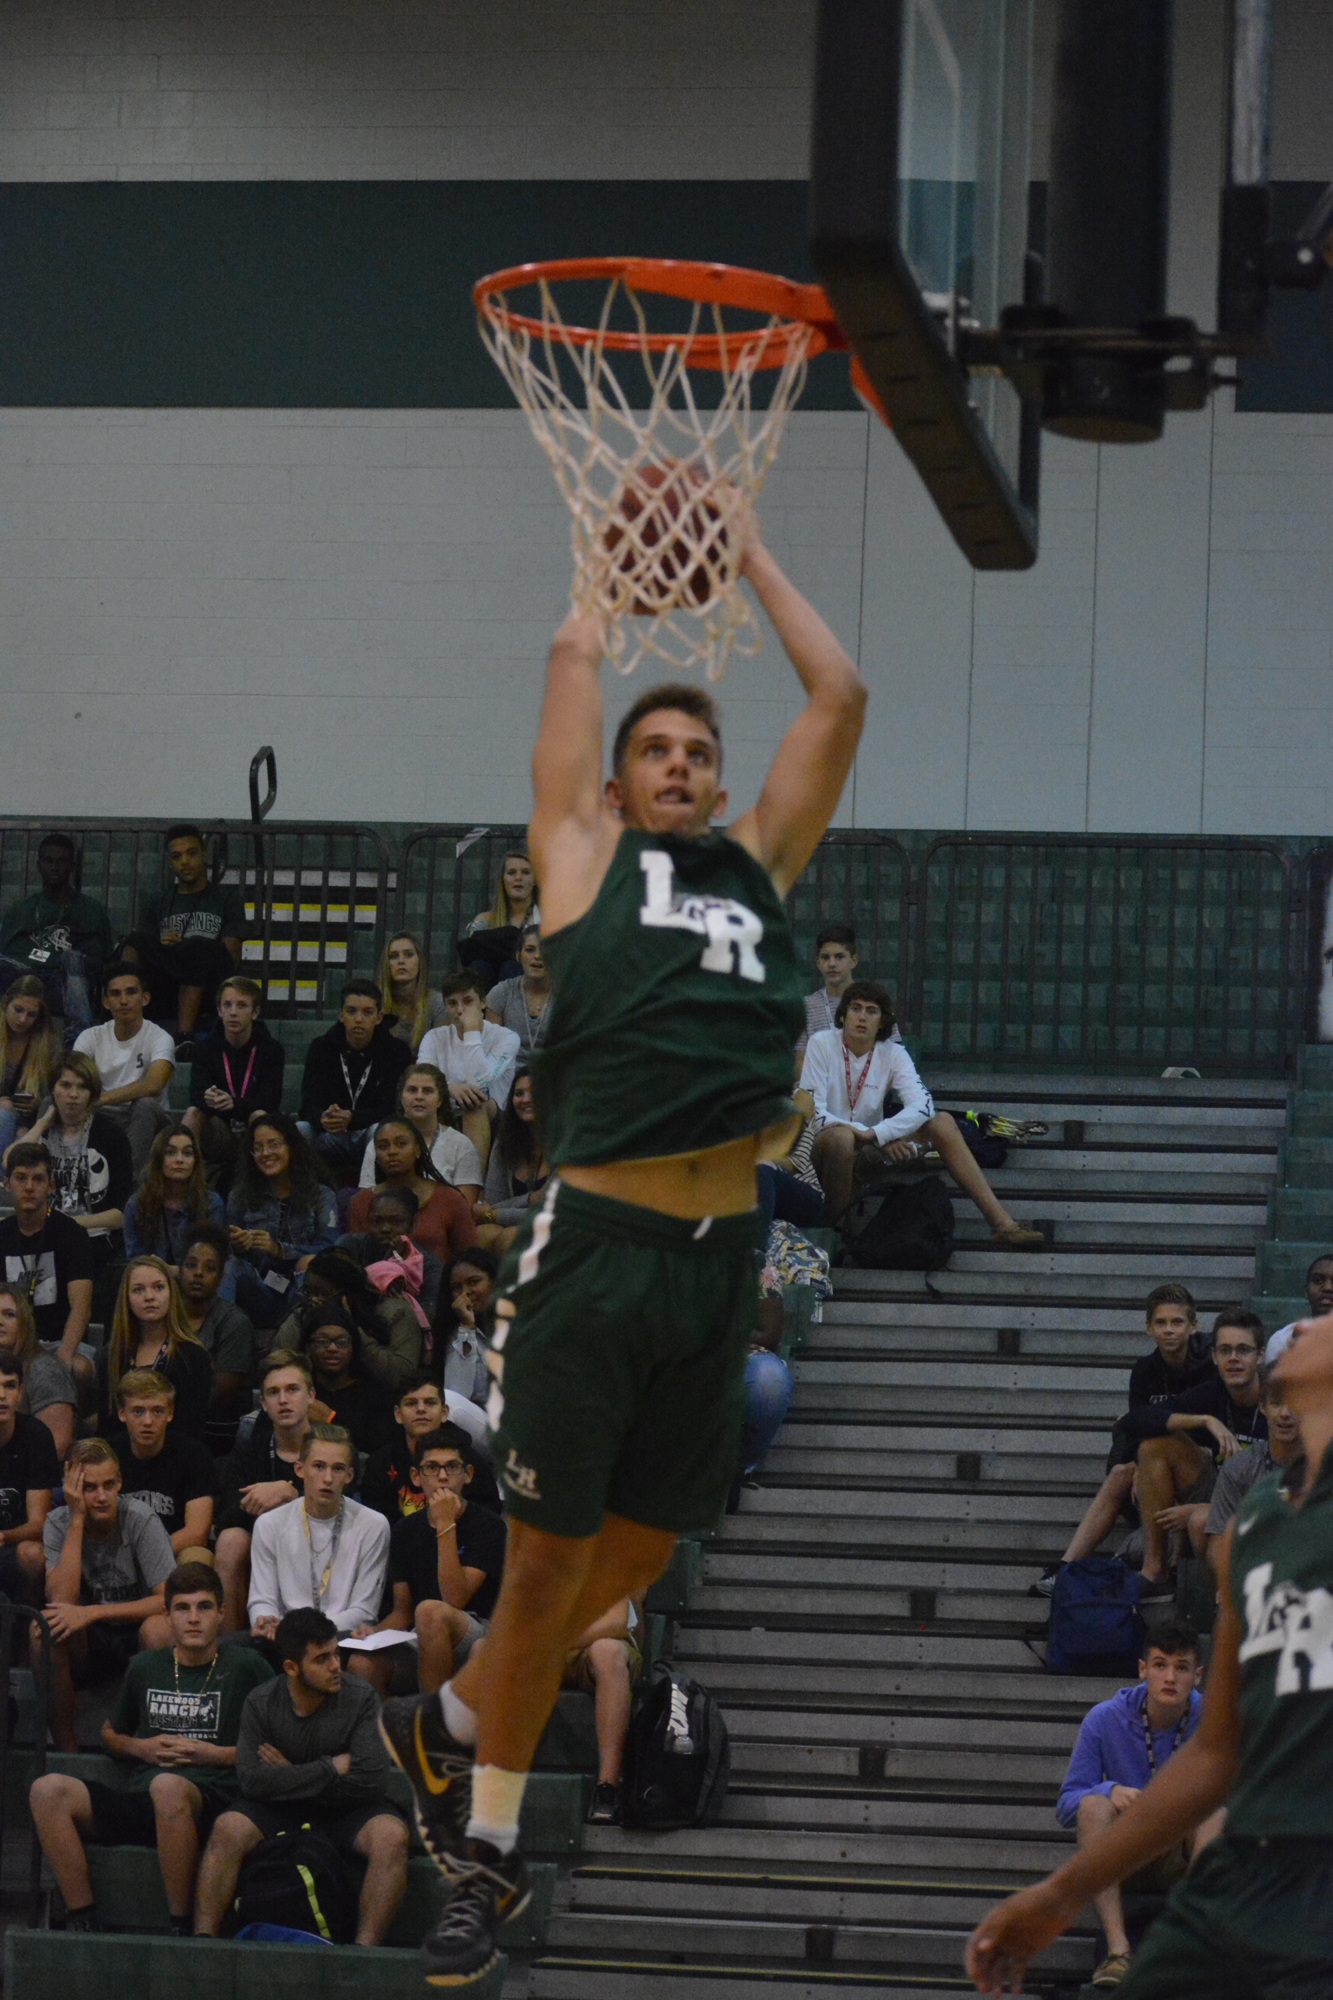 Mustangs senior Jack Kelley won the dunk contest in part thanks to this baseline slam.